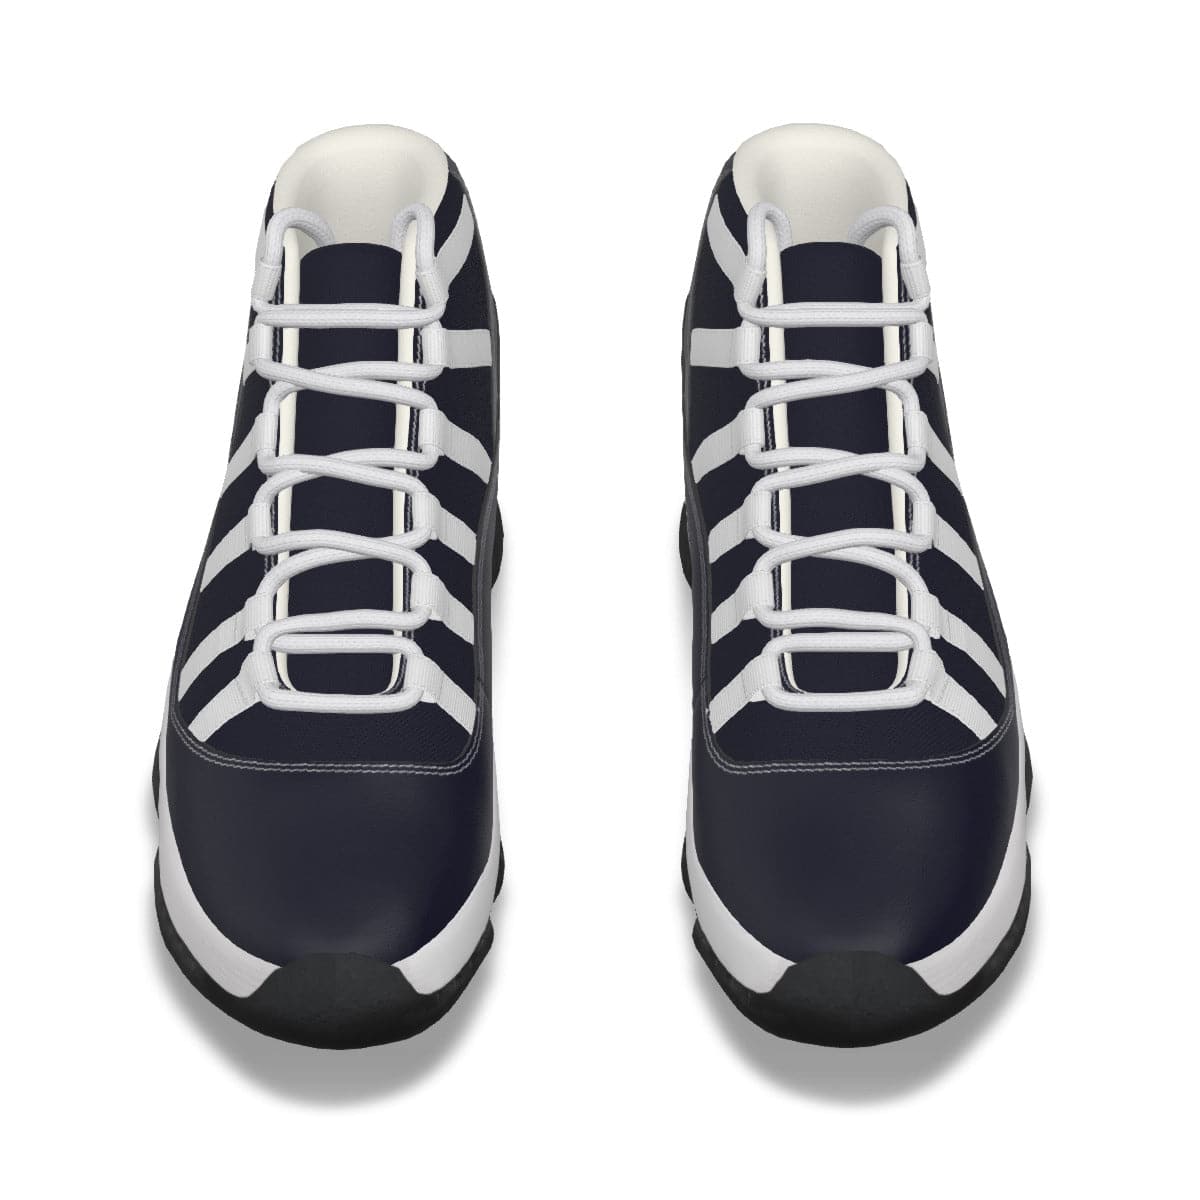 These Darker Blues High Top Basketball Shoe for Men Who Sport Outdoors by Senus Studio Design